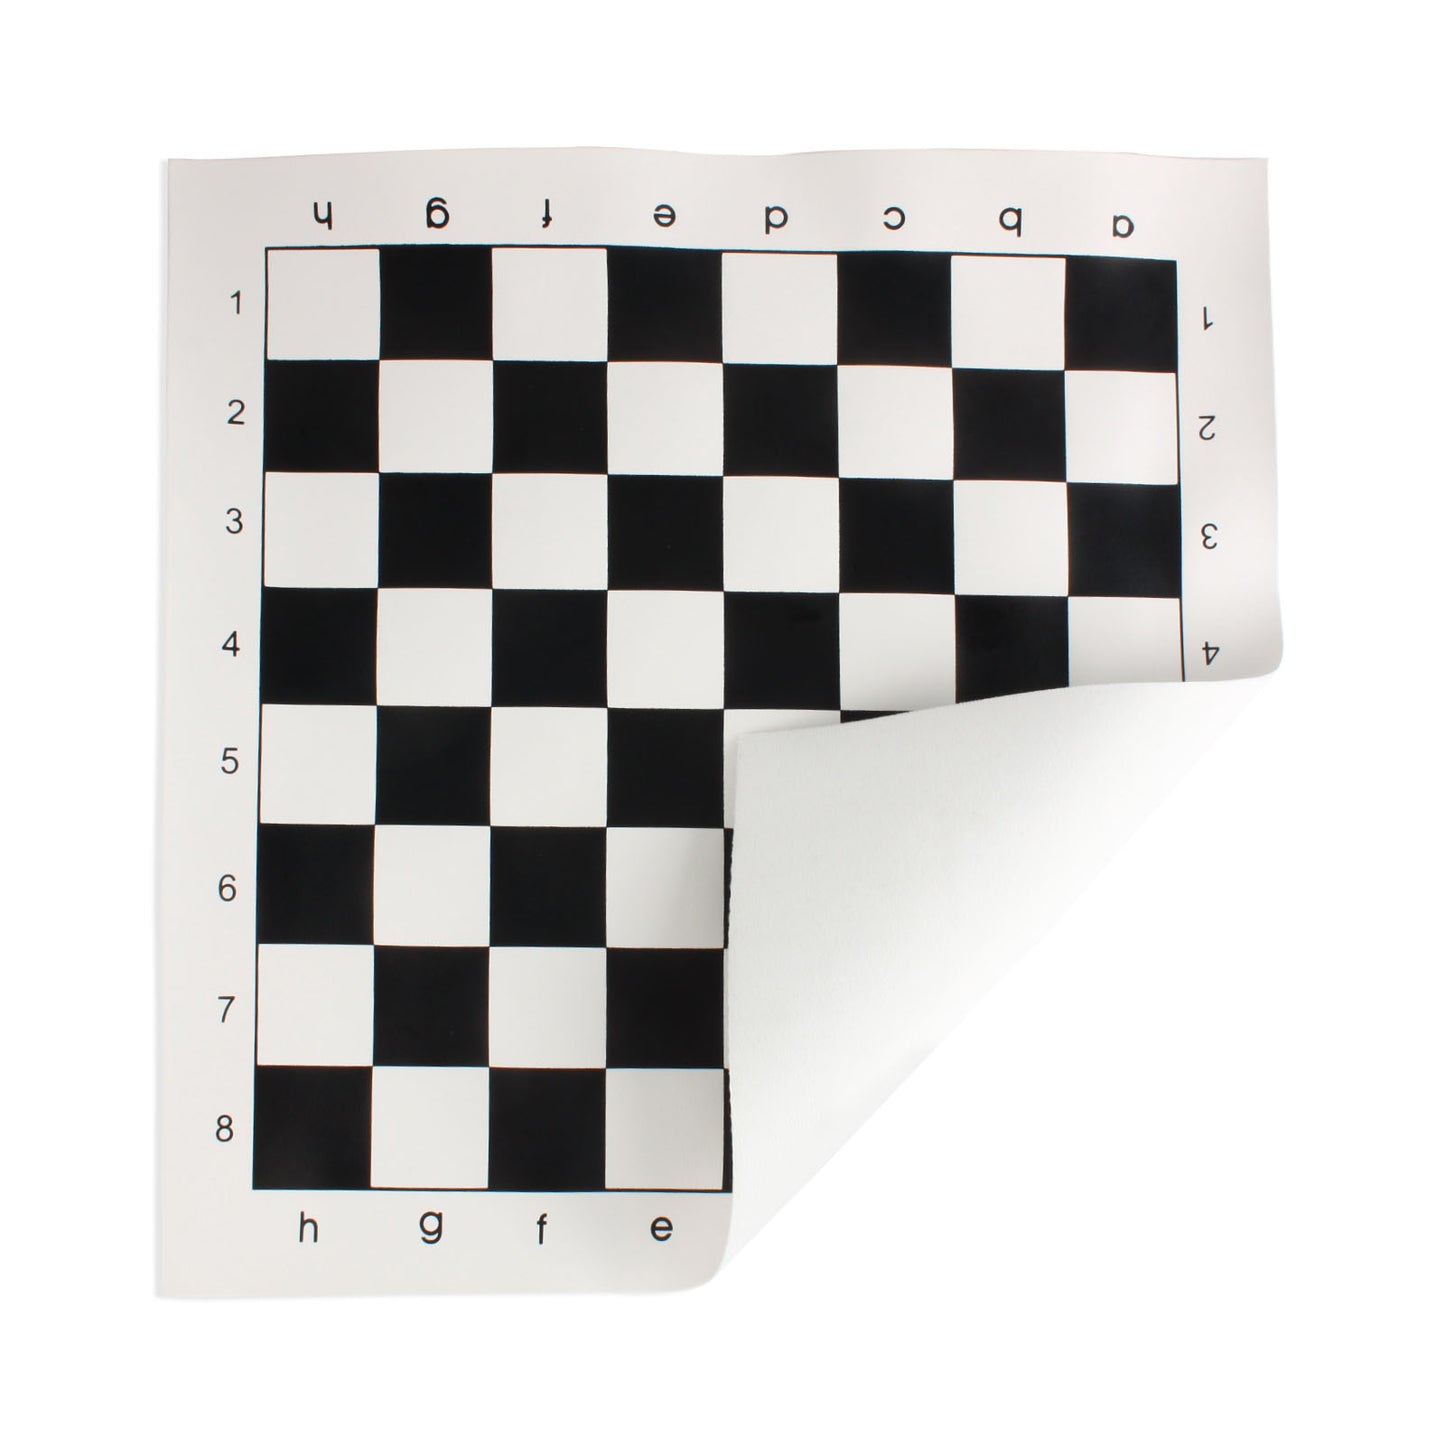 Andux Chess Game Rollable Chessboard XQQP-01 (Black,35x35cm)